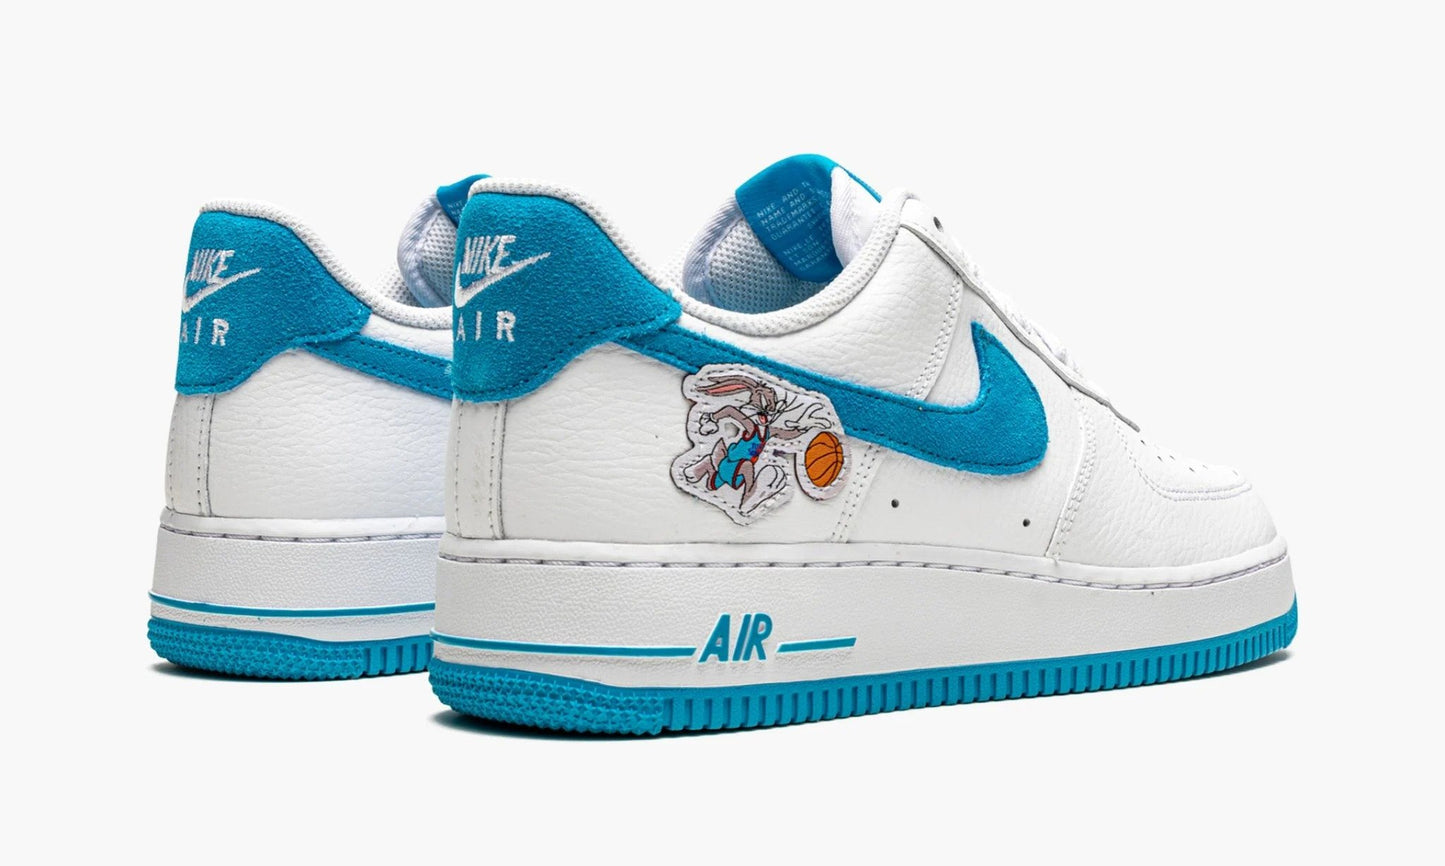 Force 1 Low "Hare Space Jam"